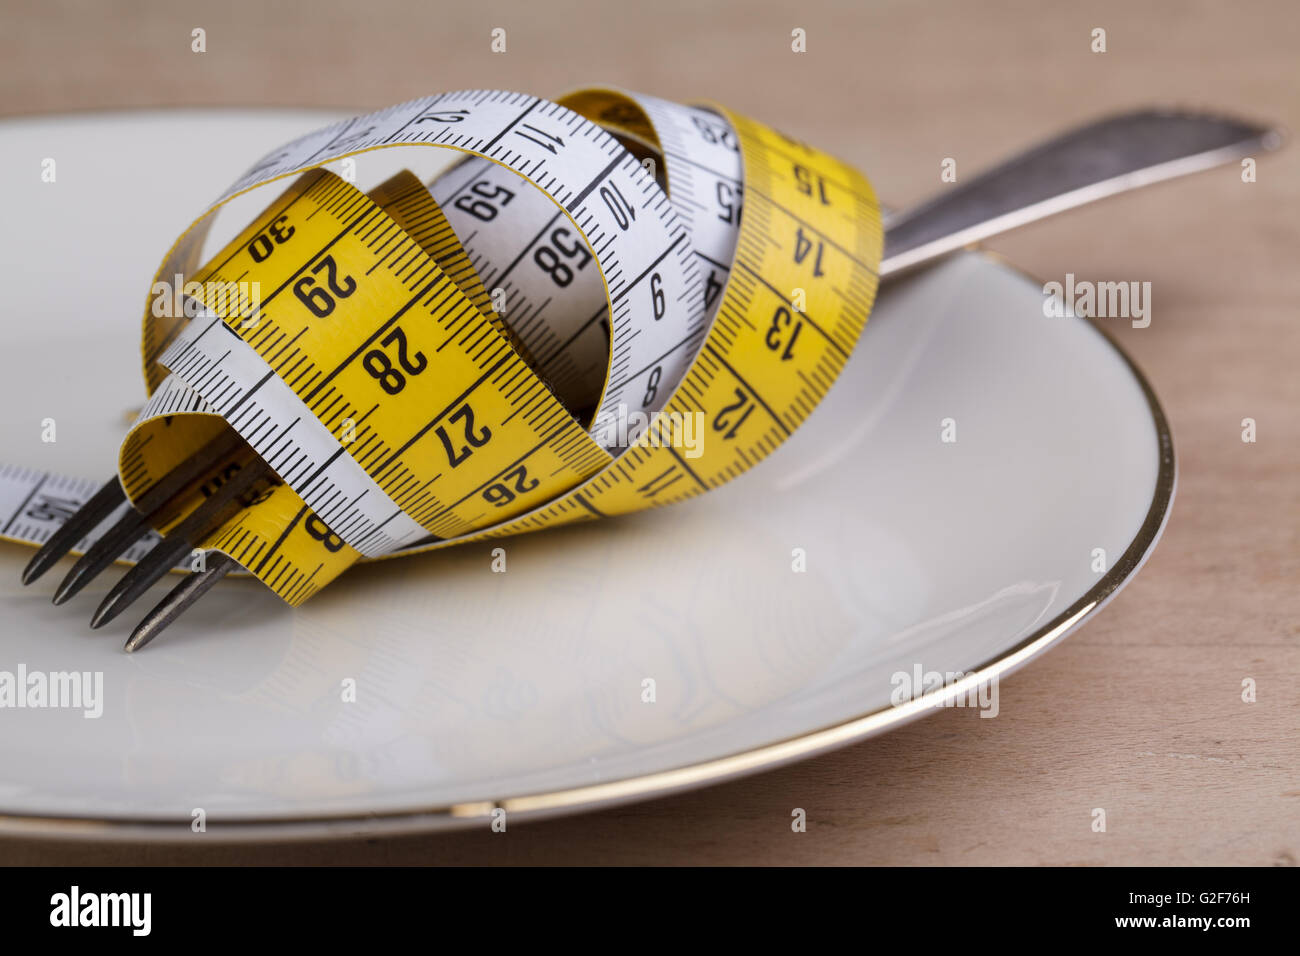 Fork with measuring tape as a symbol of disciplined dieting and weight reduction Stock Photo